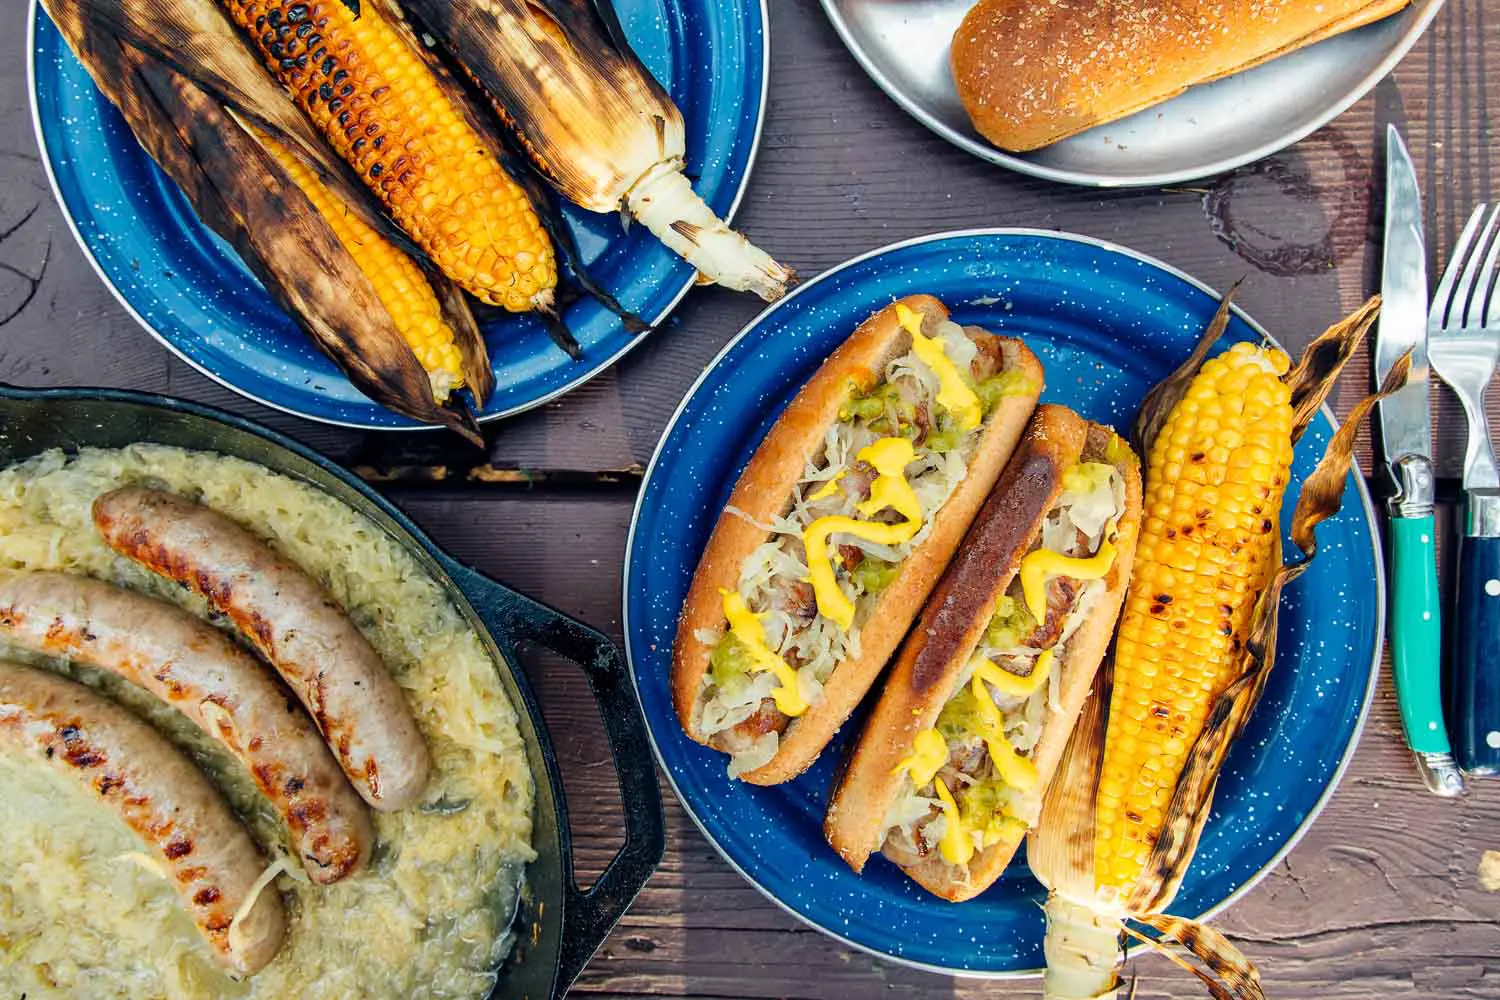 Overhead view of a plate with grilled beer brats, sauerkraut, and grilled corn